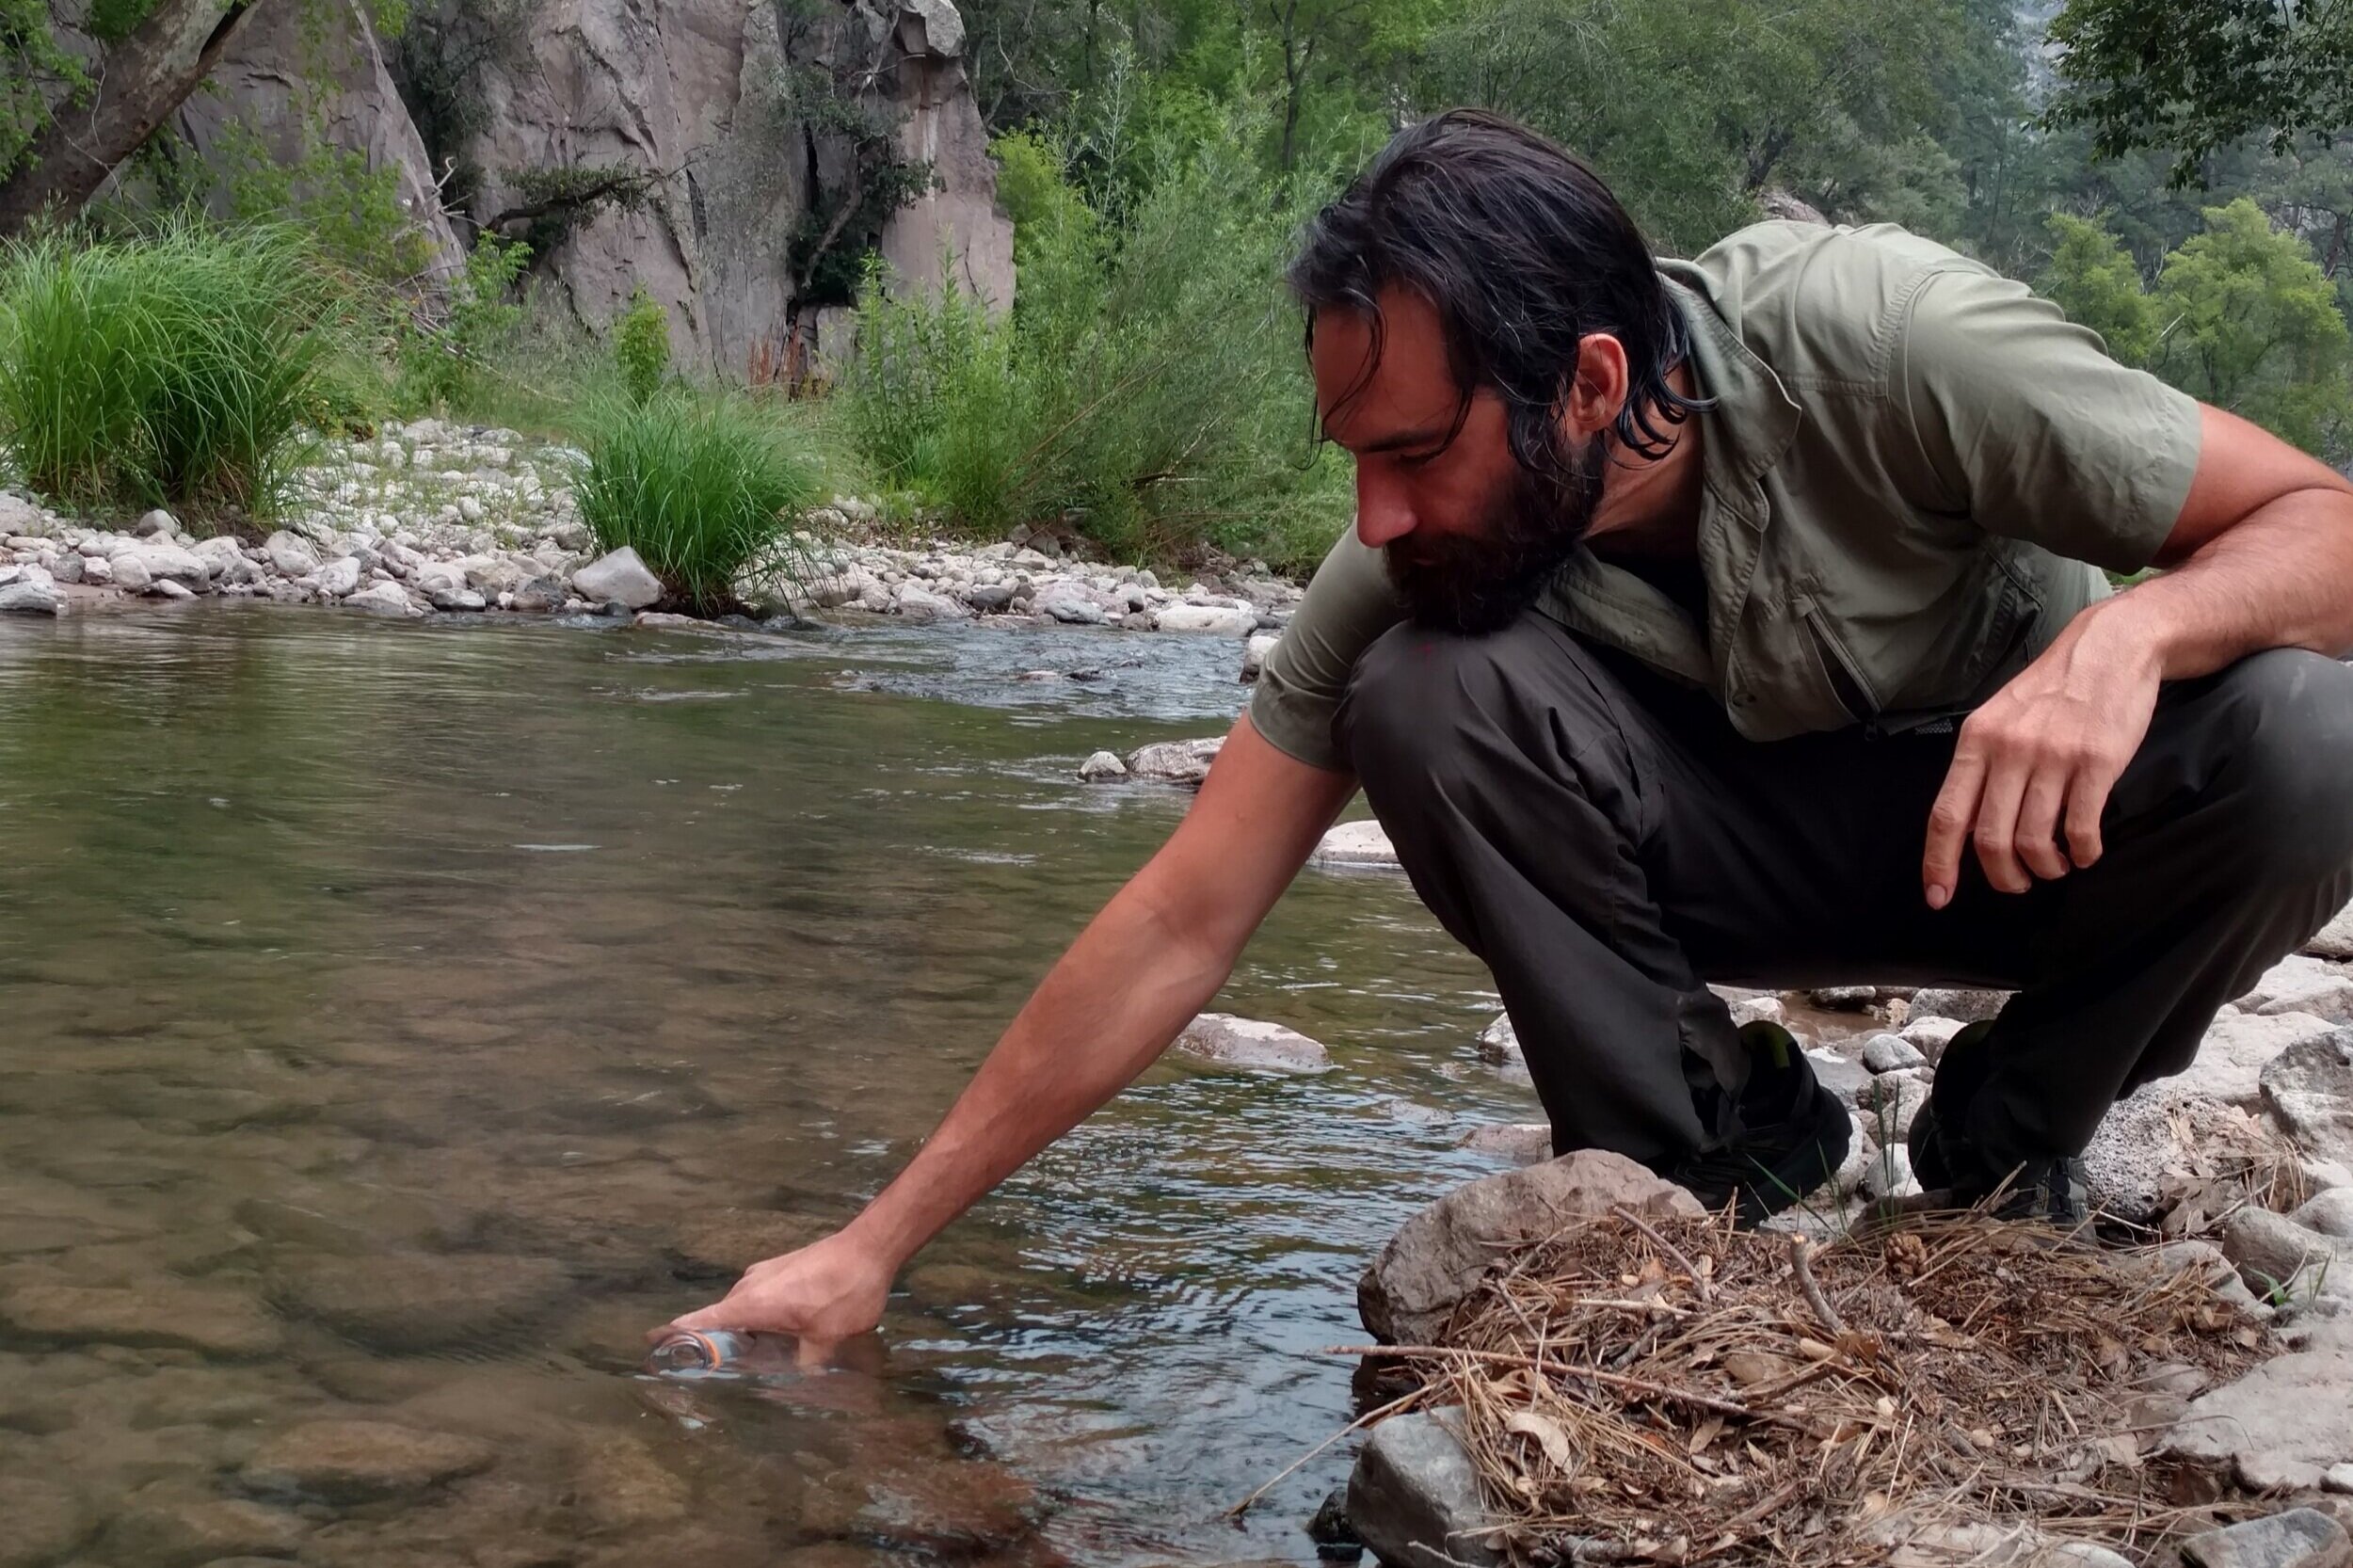 Filling a water bottle at the Gila River in New Mexico